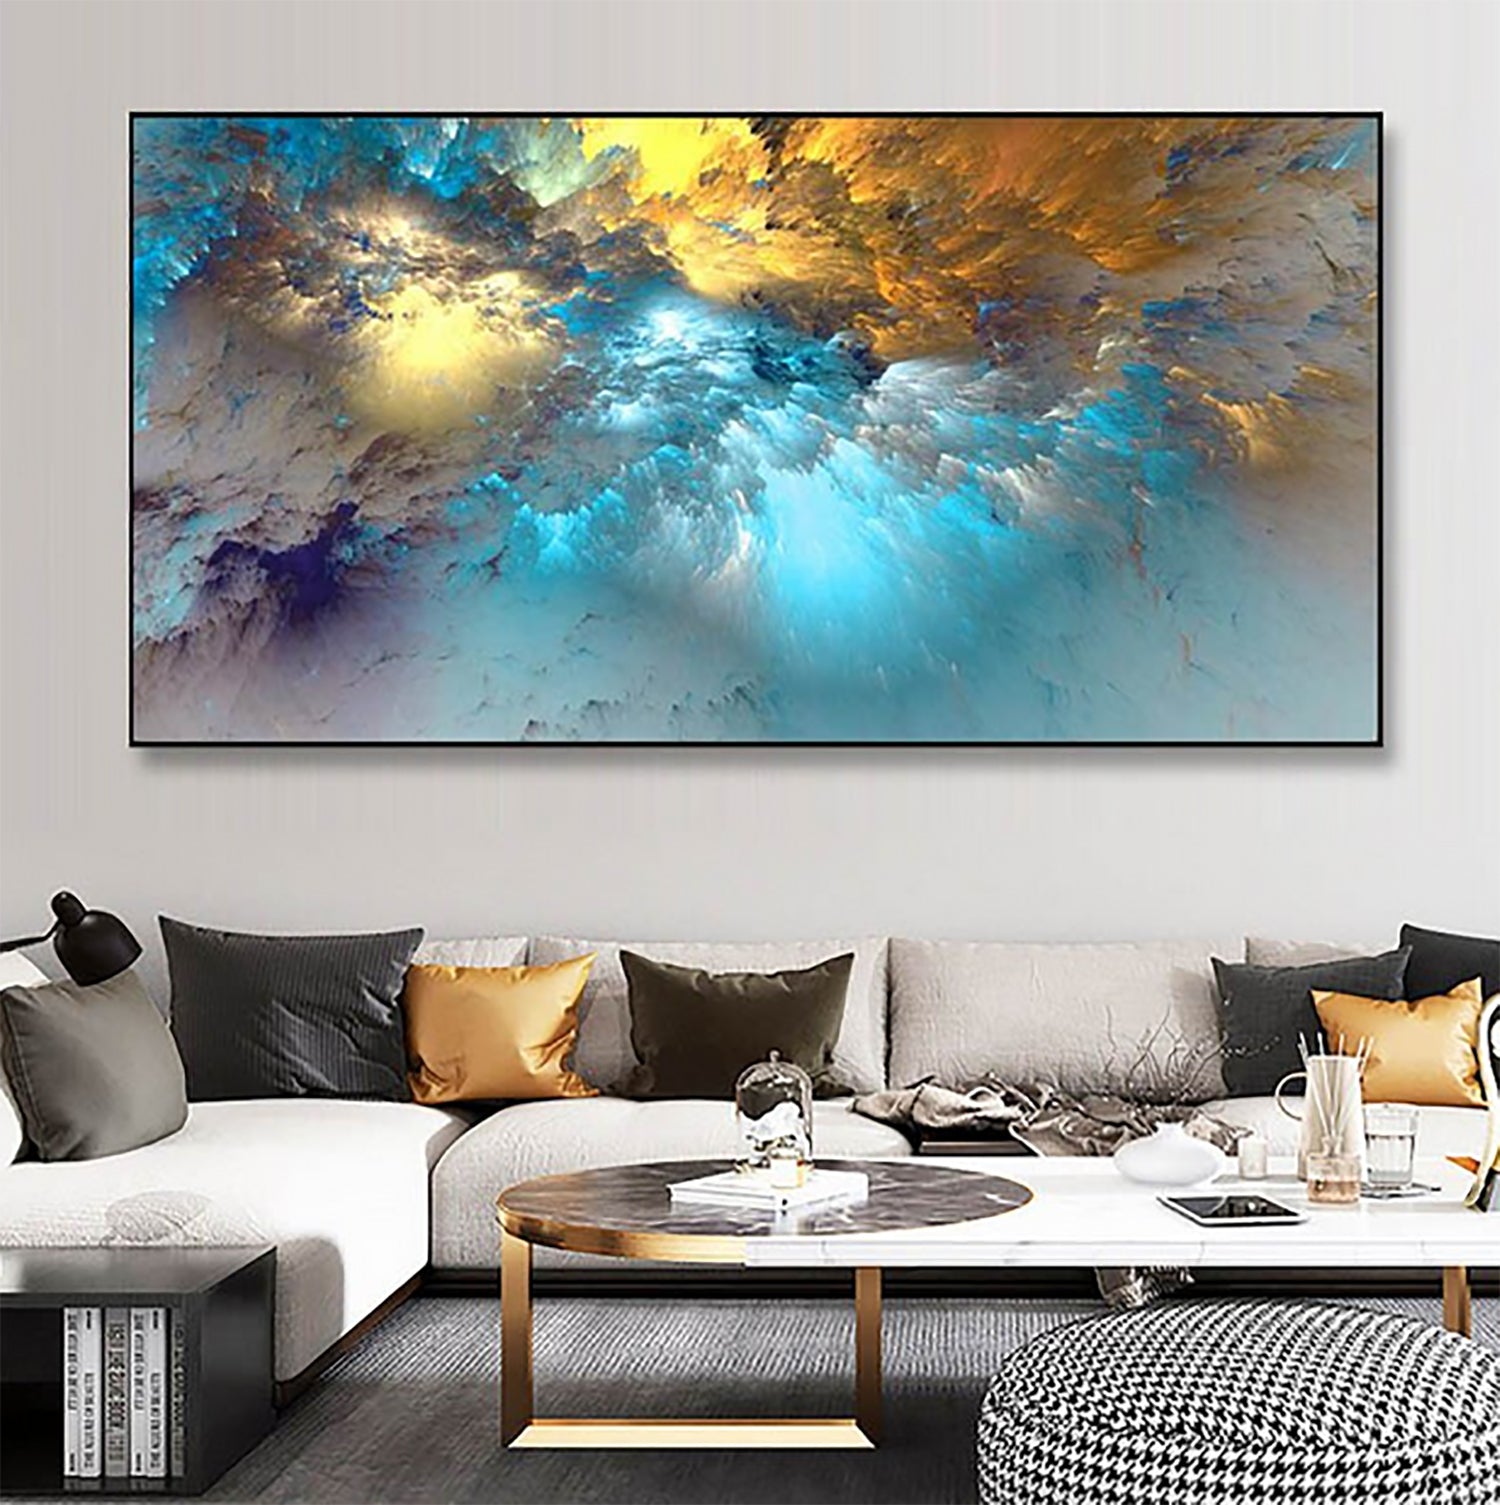 TPFLiving Poster / Clouds Traumpreisfabrik – / Abstract Canvas Colorful Sizes Various - 